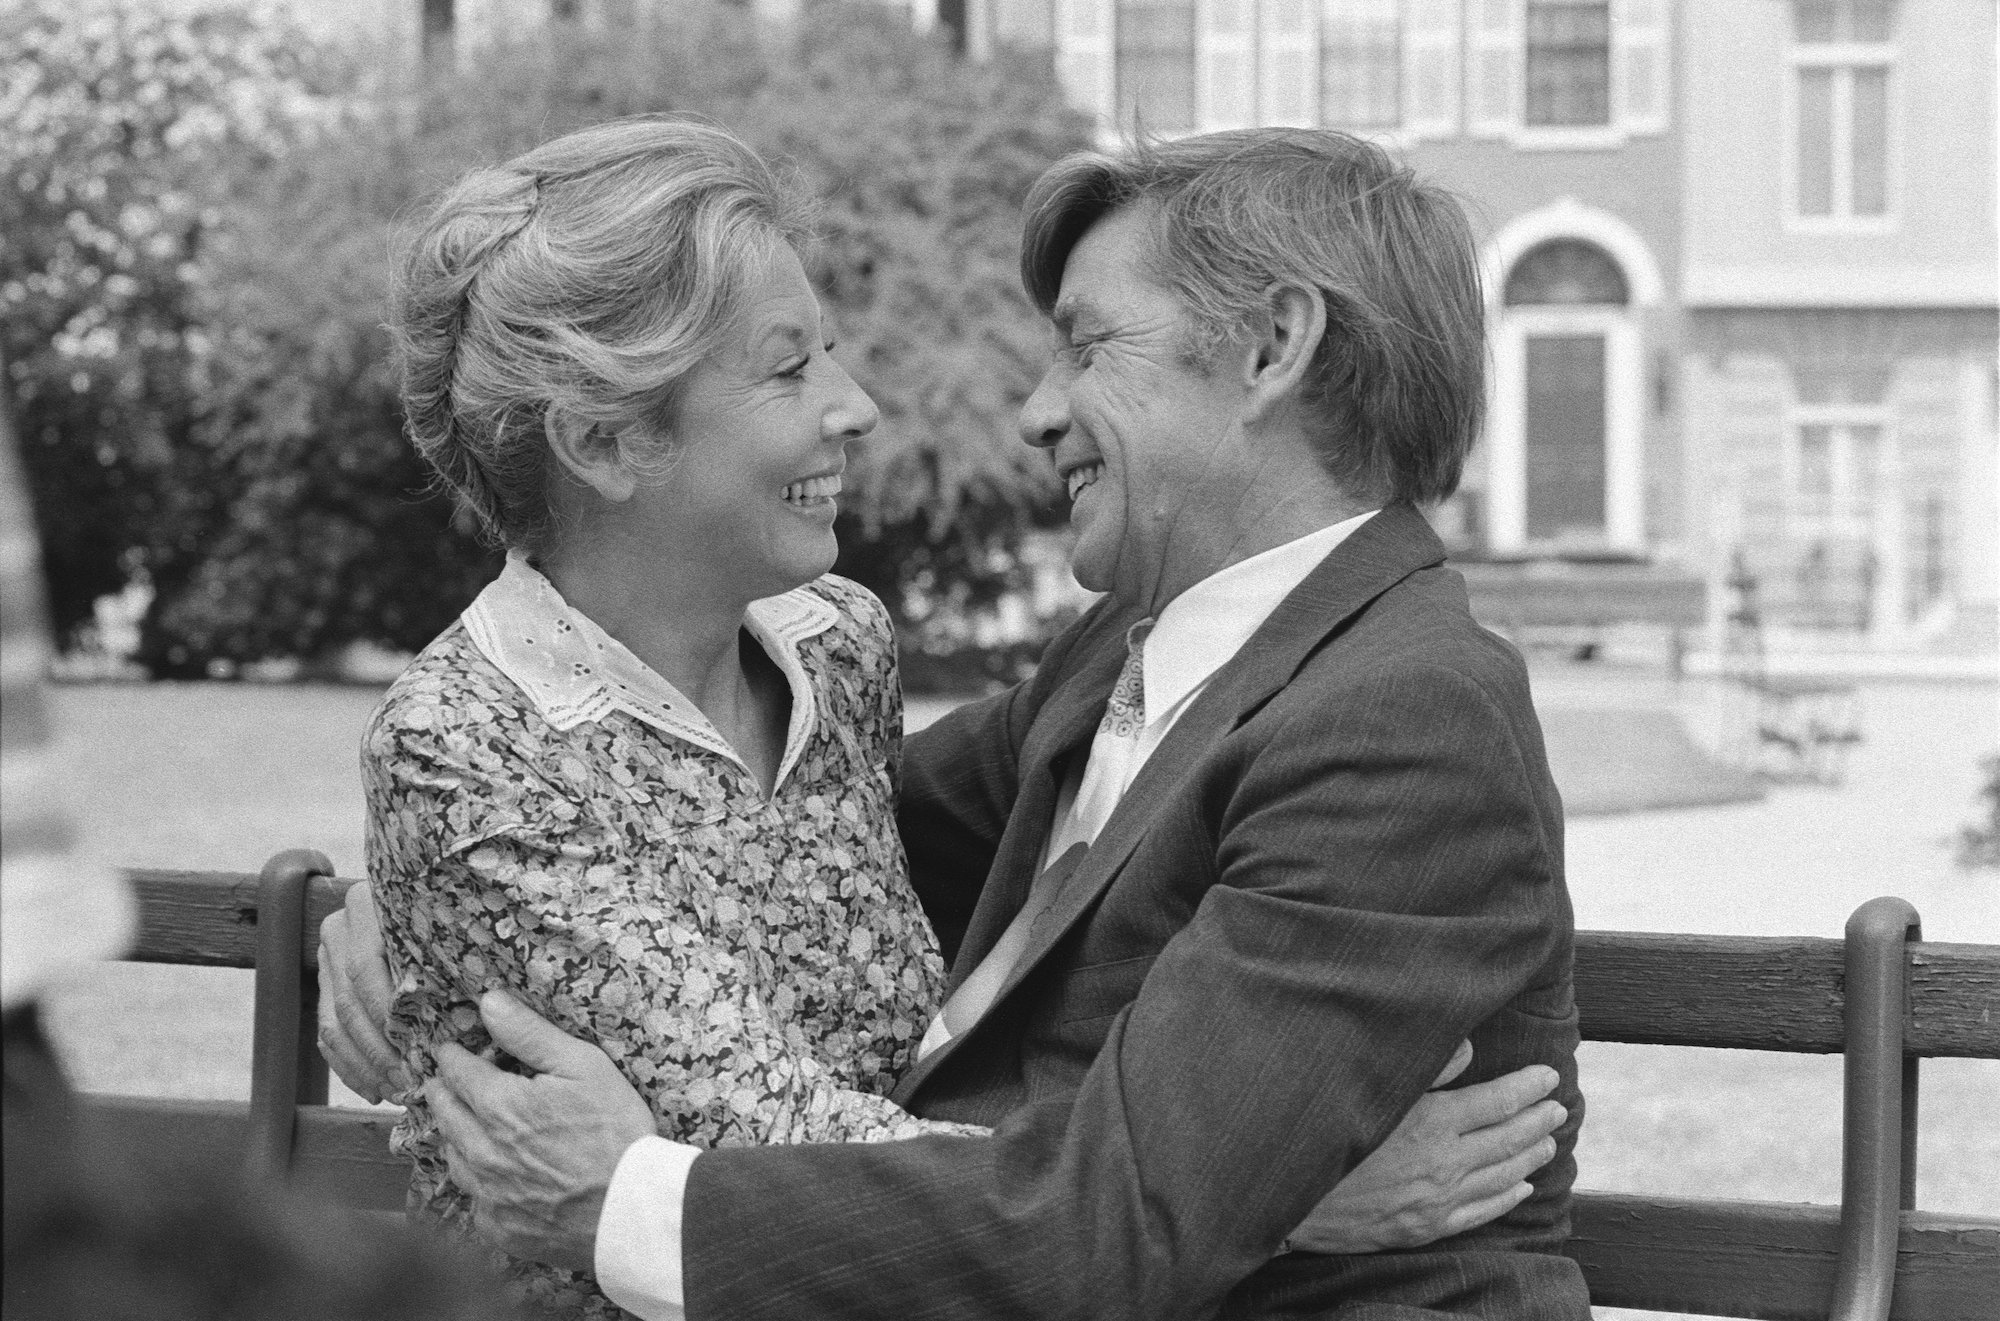 (L-R) Michael Learned as Olivia Walton and Ralph Waite as John Walton, facing each other, embracing